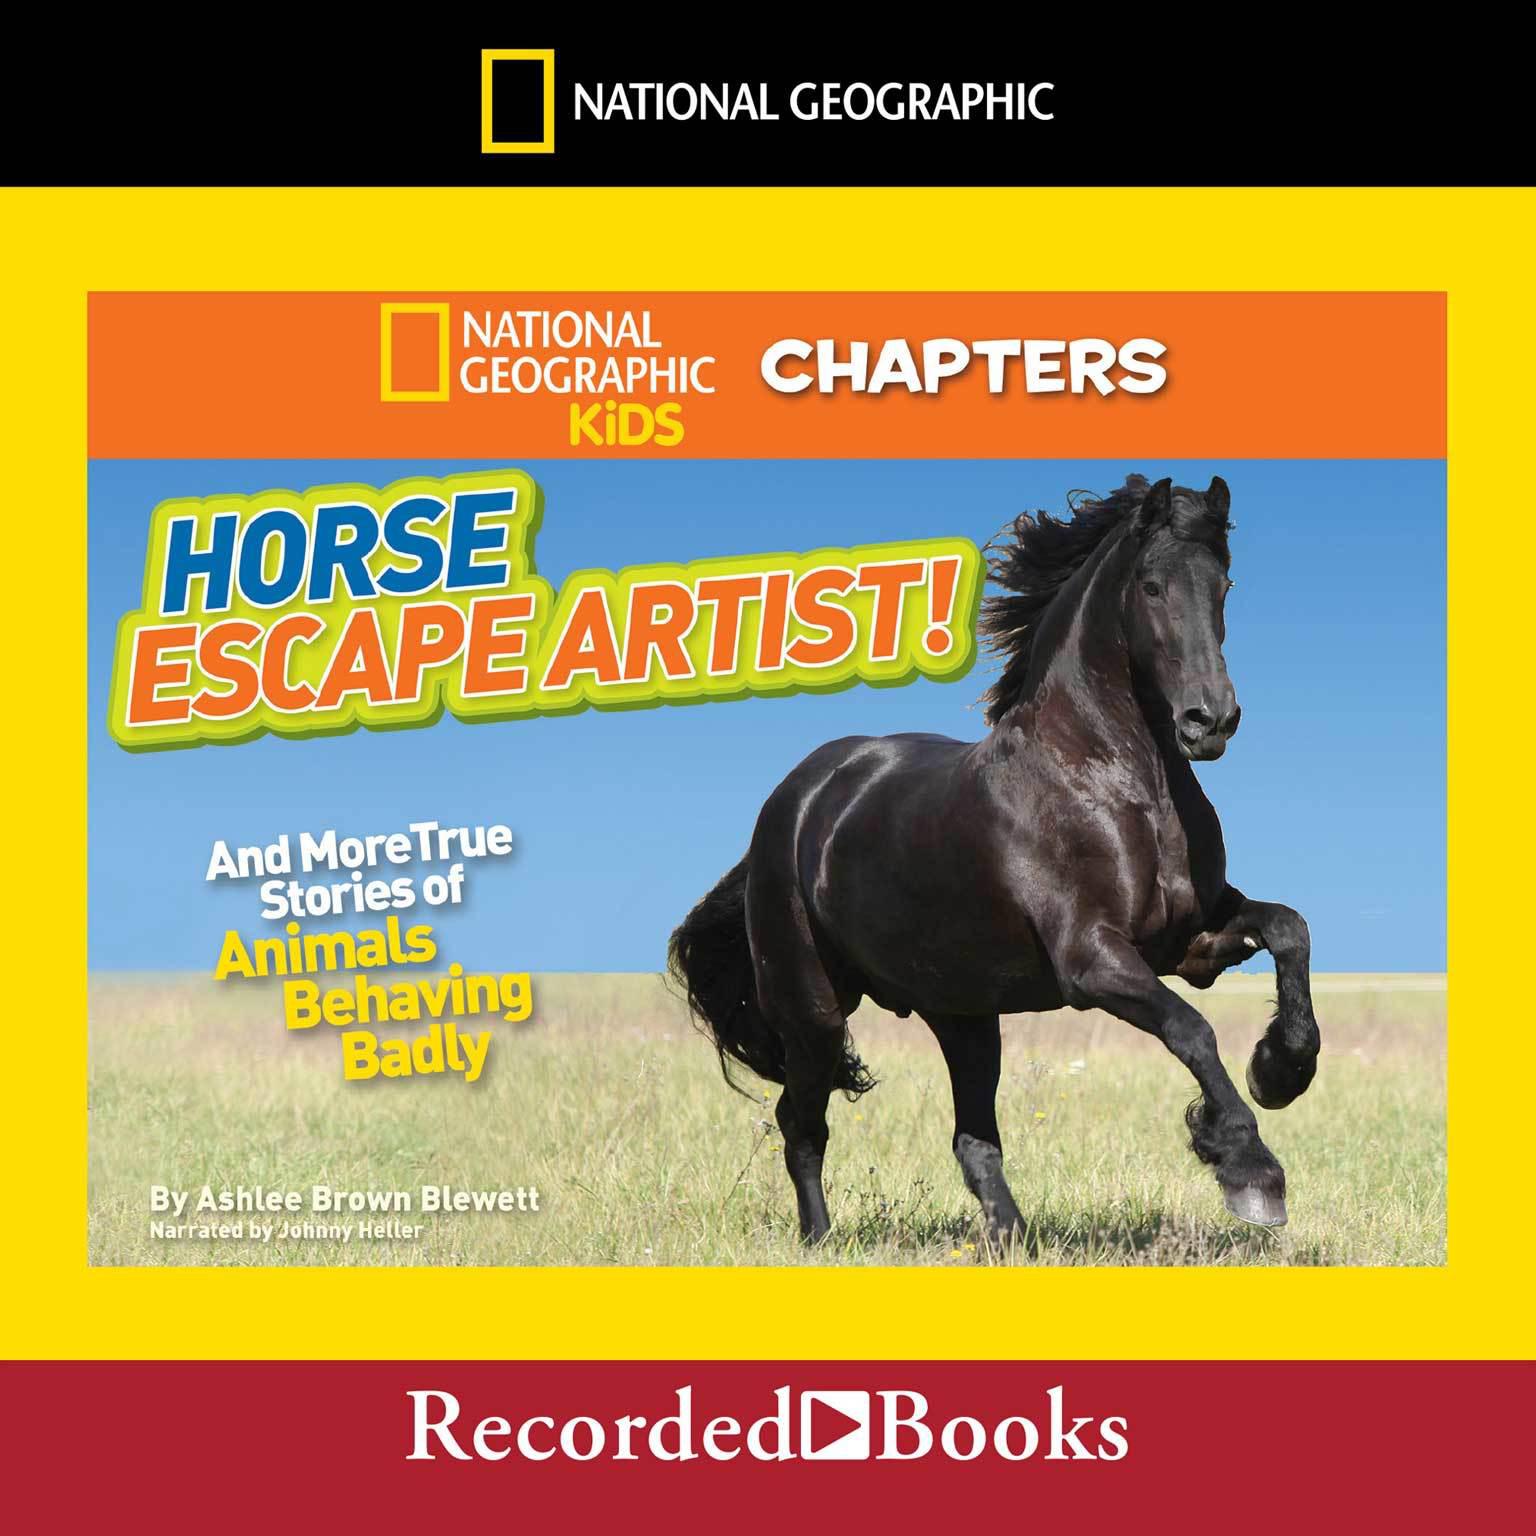 Horse Escape Artist: And More True Stories of Animals Behaving Badly Audiobook, by Ashlee Brown Blewett